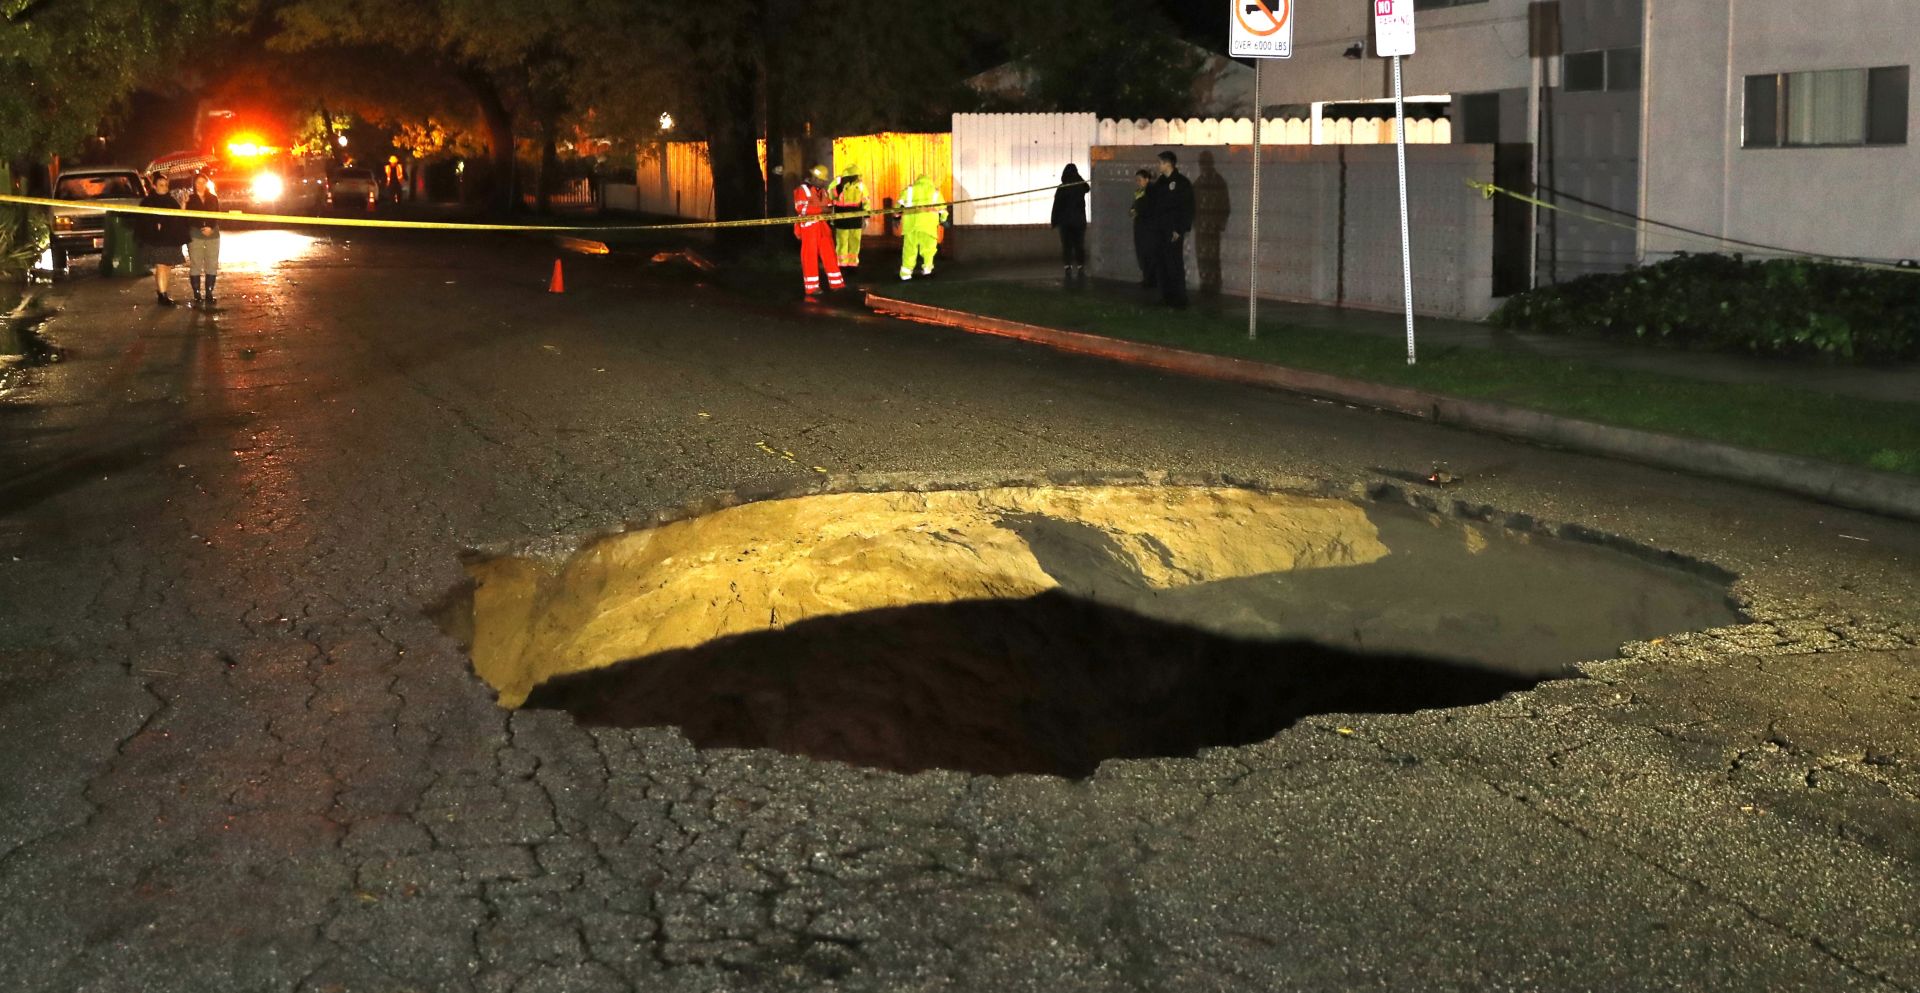 epa05801117 Emergency personnel stand near a sinkhole that opened up on Laurel Canyon Boulevard in Studio City, California, USA, 17 February 2017 and in which two cars were trapped.  A strong atmospheric river rain storm is pounding southern California causing flooding and falling trees which has resulted in two deaths.  EPA/MIKE NELSON